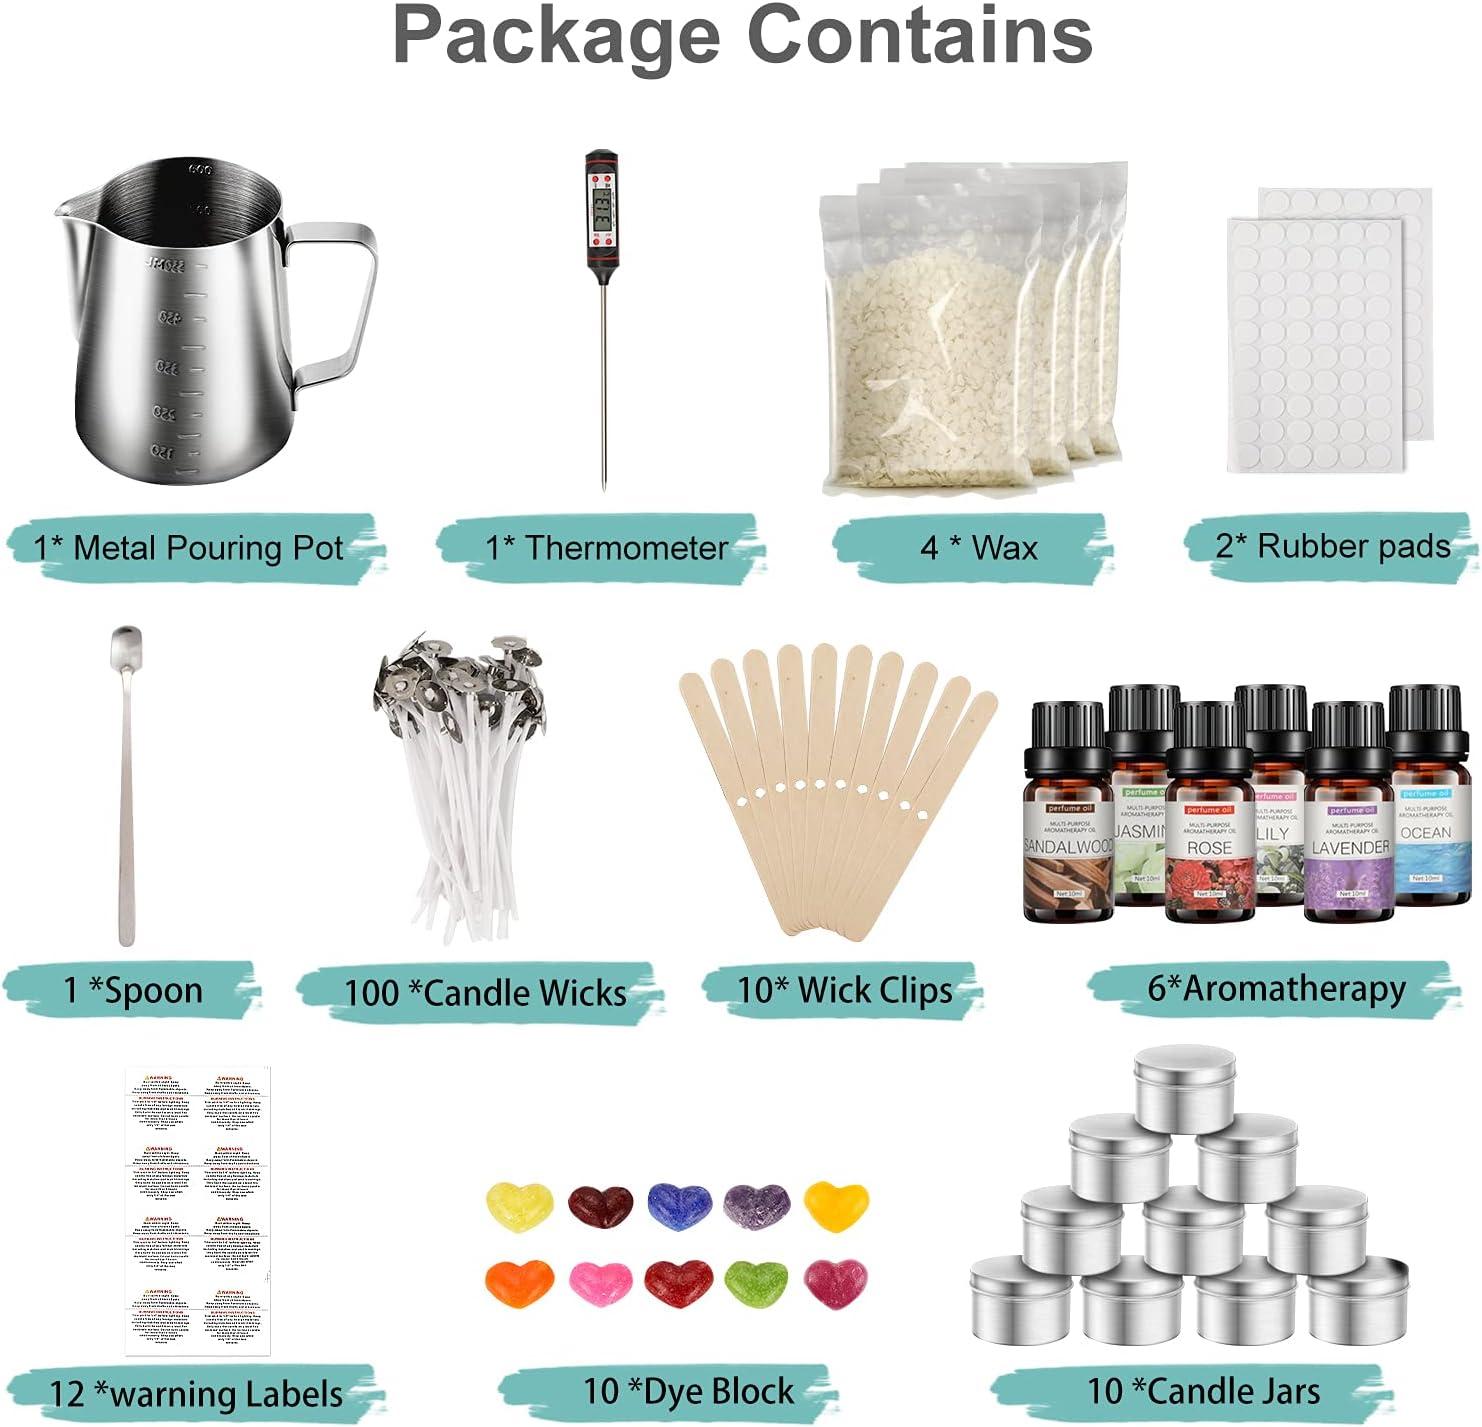 Candle Making Kit, DIY Candle Making Supplies, Candle Kit with Melting Pot,  4 Tins ,4 Candle Wax (Soy Wax) Bags, 4 Dye Blocks, Candle Wicks and More